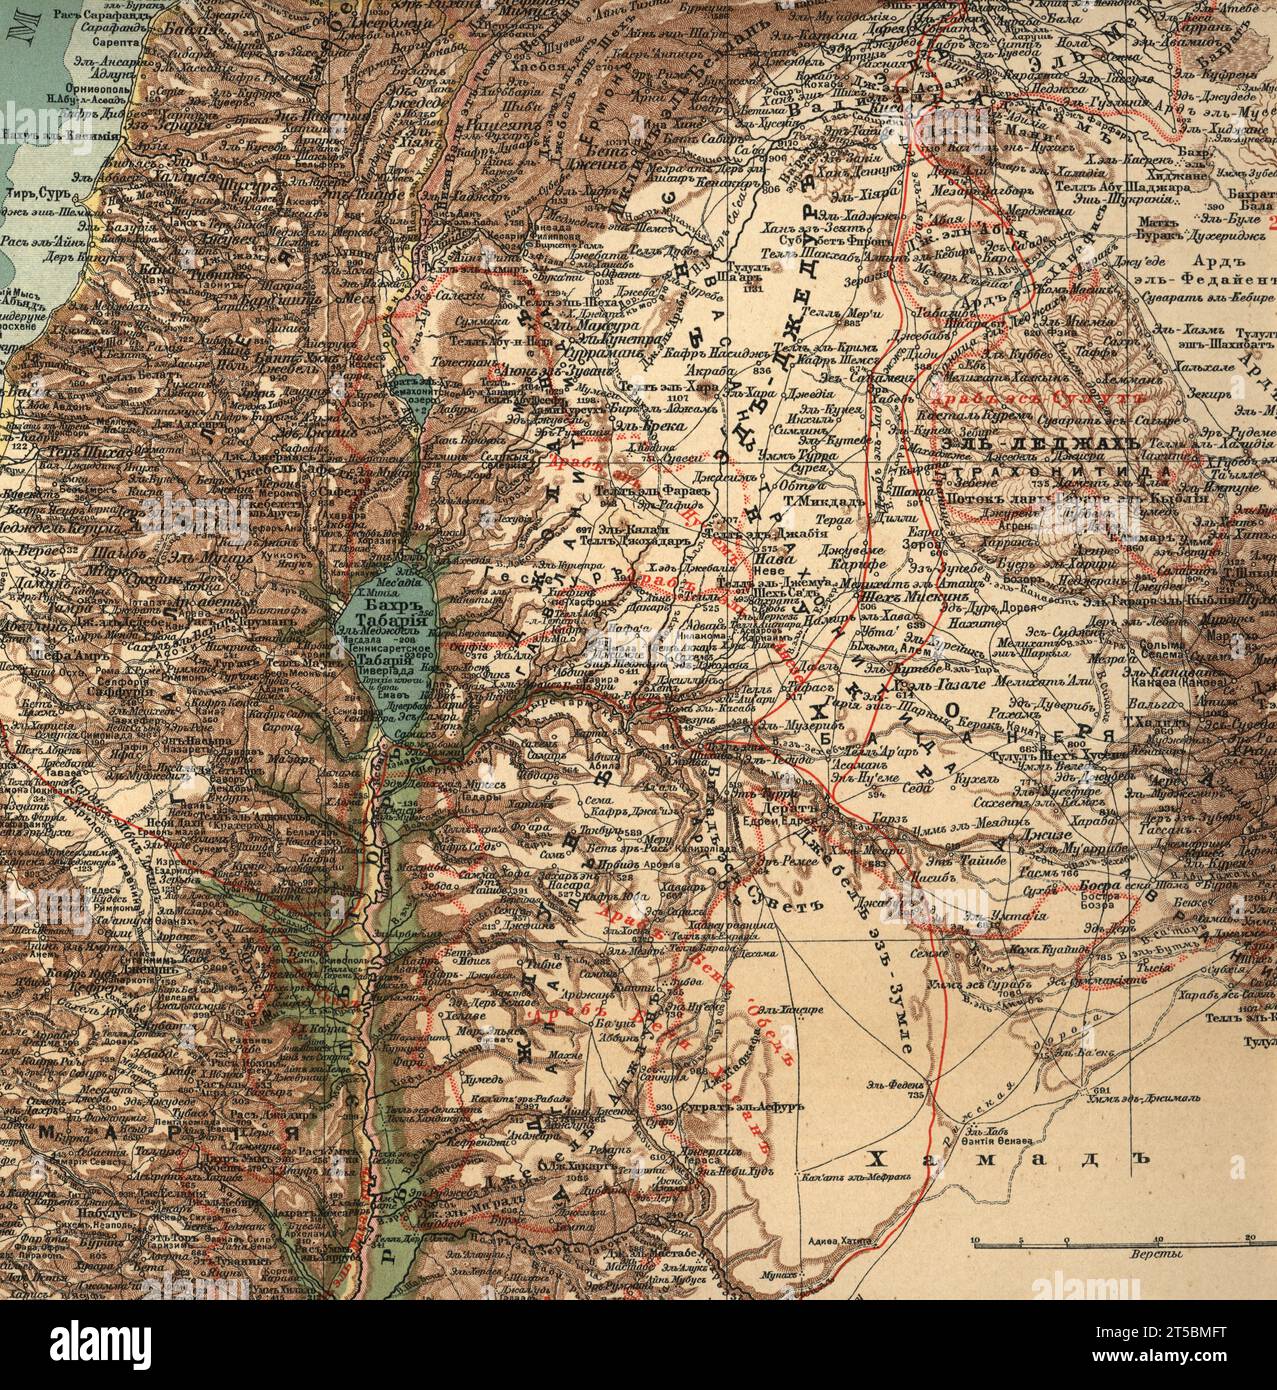 A detailed vintage map of part of Palestine. Lake Tiberias or Sea of Galilee General geographical (physical) map Stock Photo